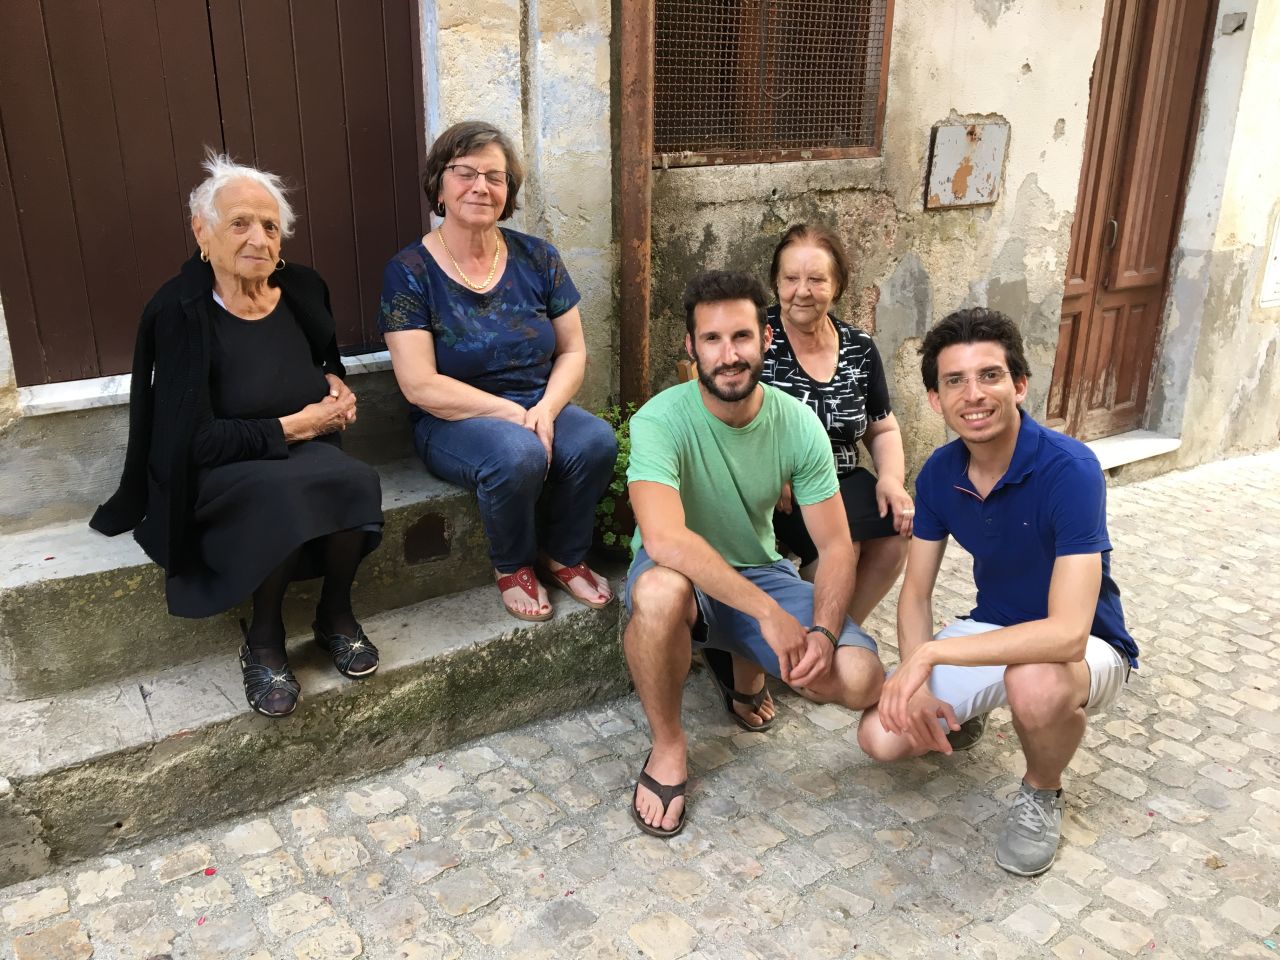 Francesco Curione, right, and a client meet with locals in the client's ancestral town.